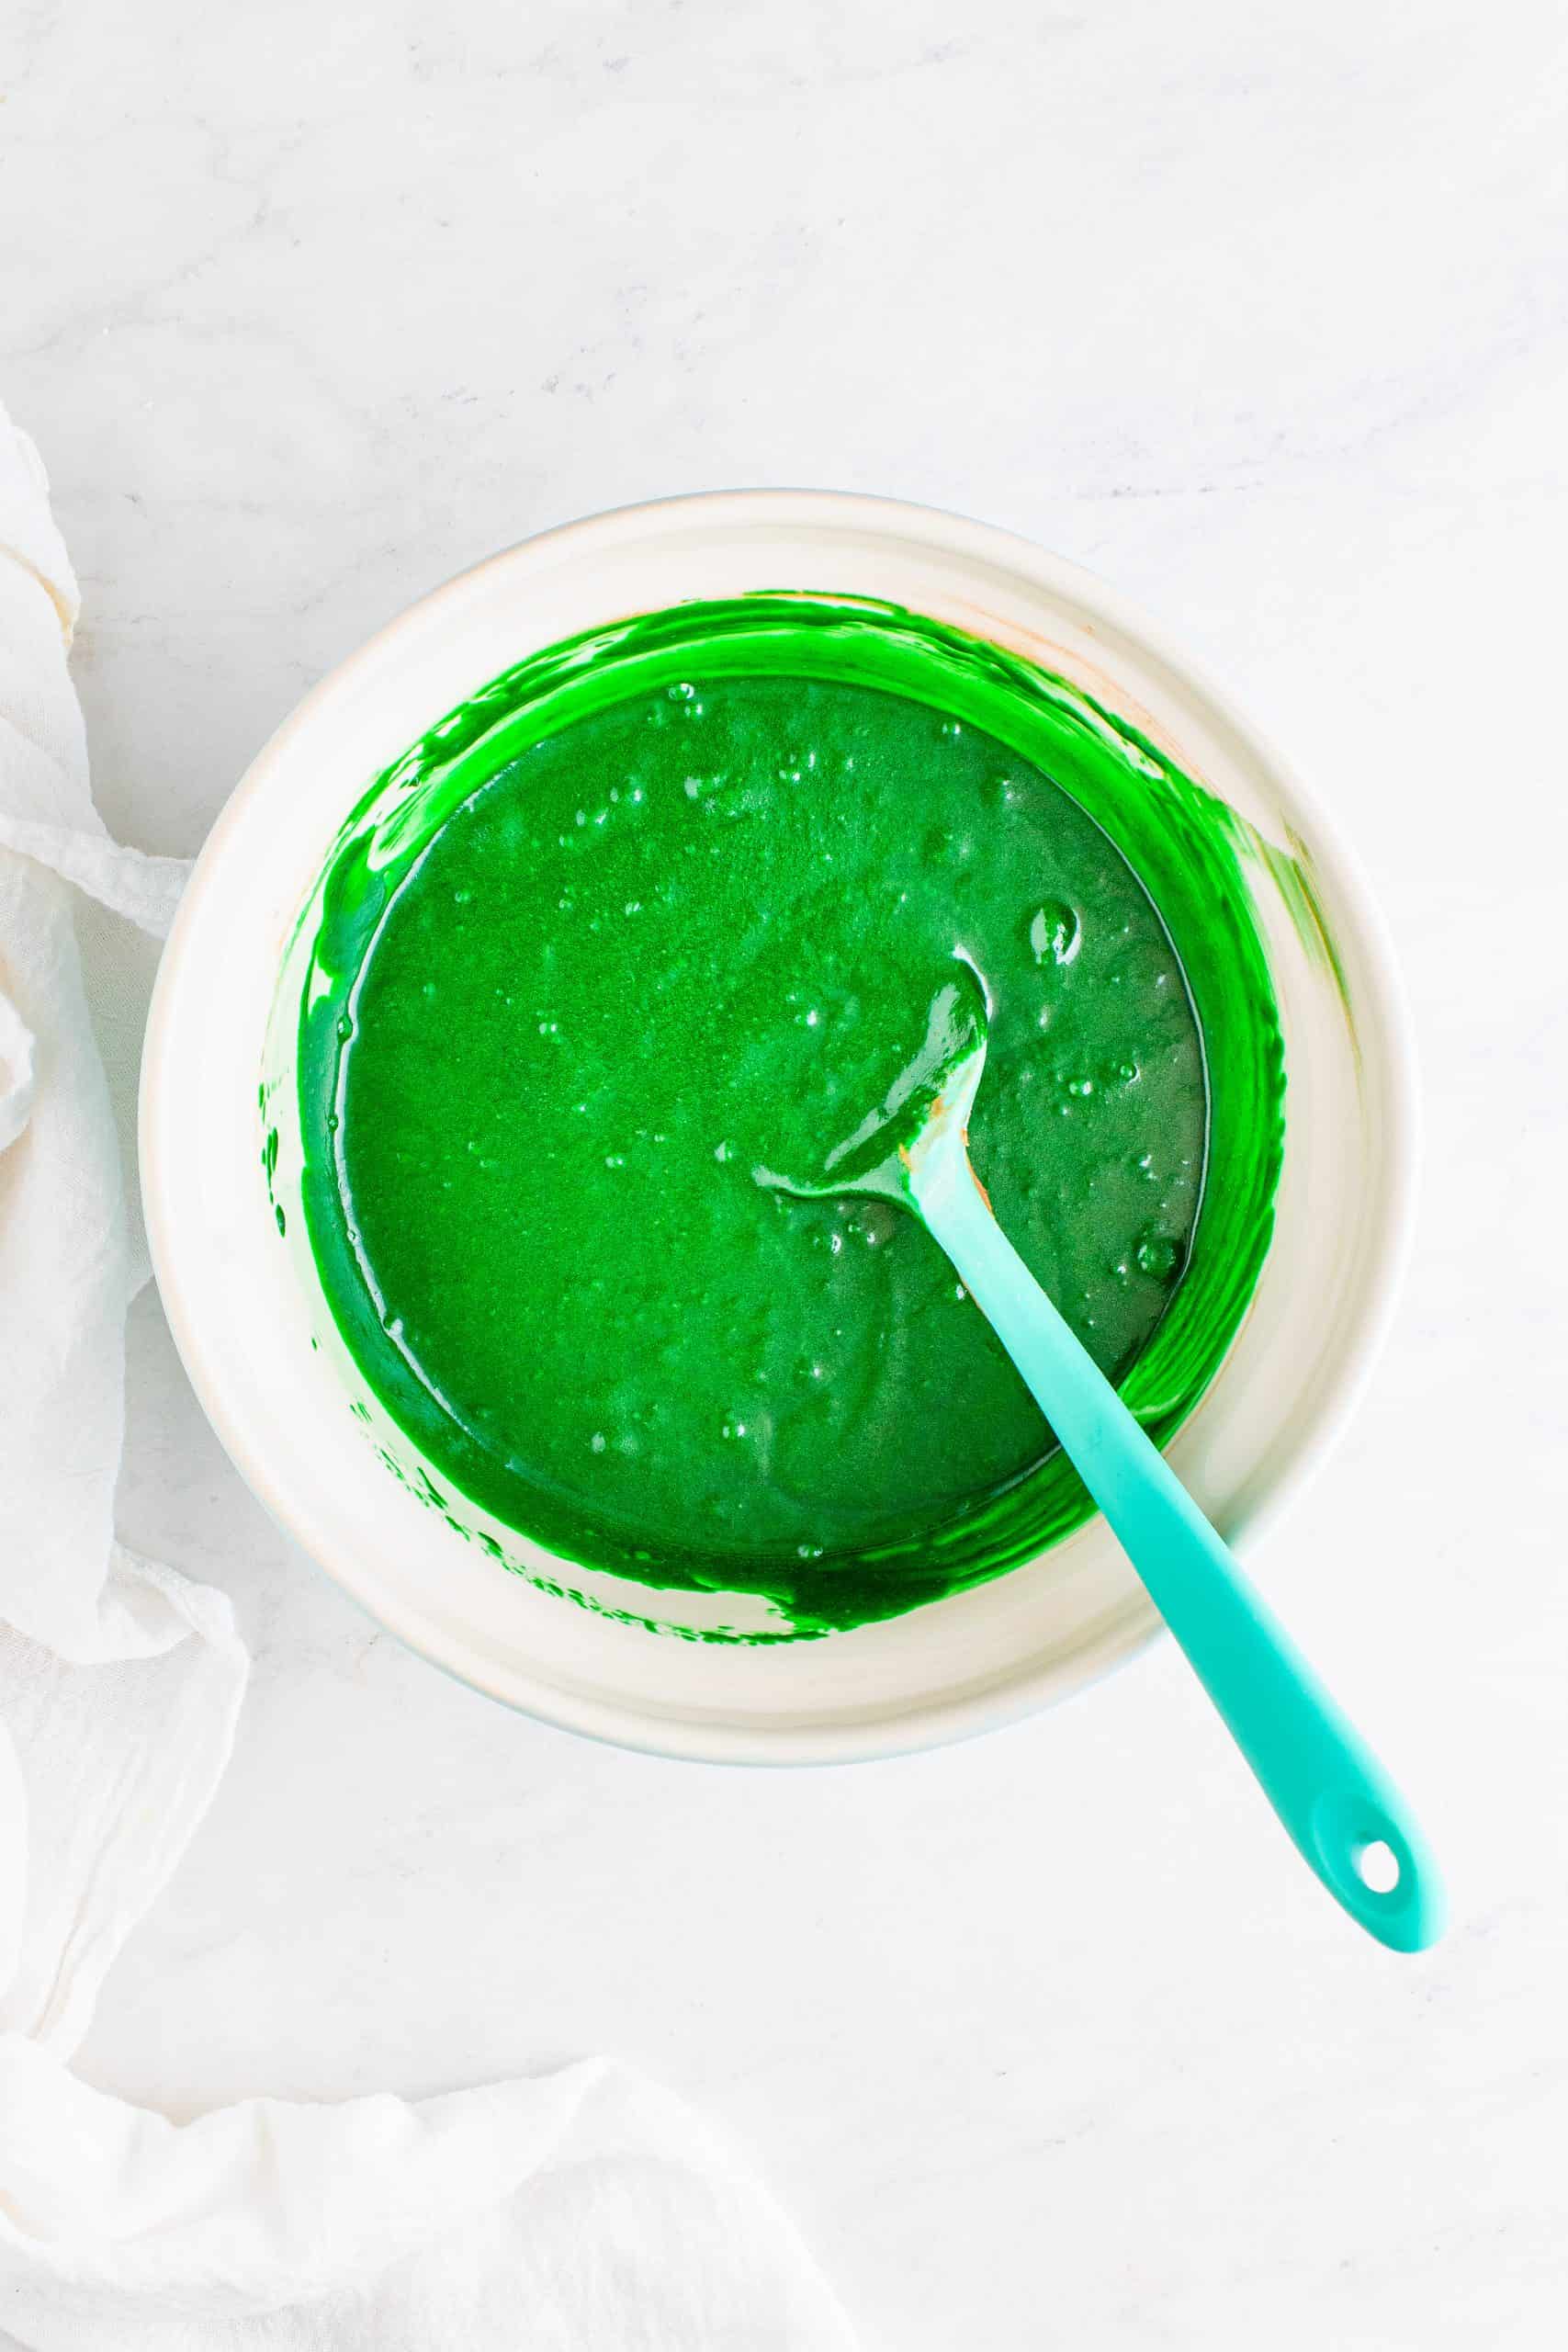 green food coloring added to cocoa cupcake batter in a white bowl.